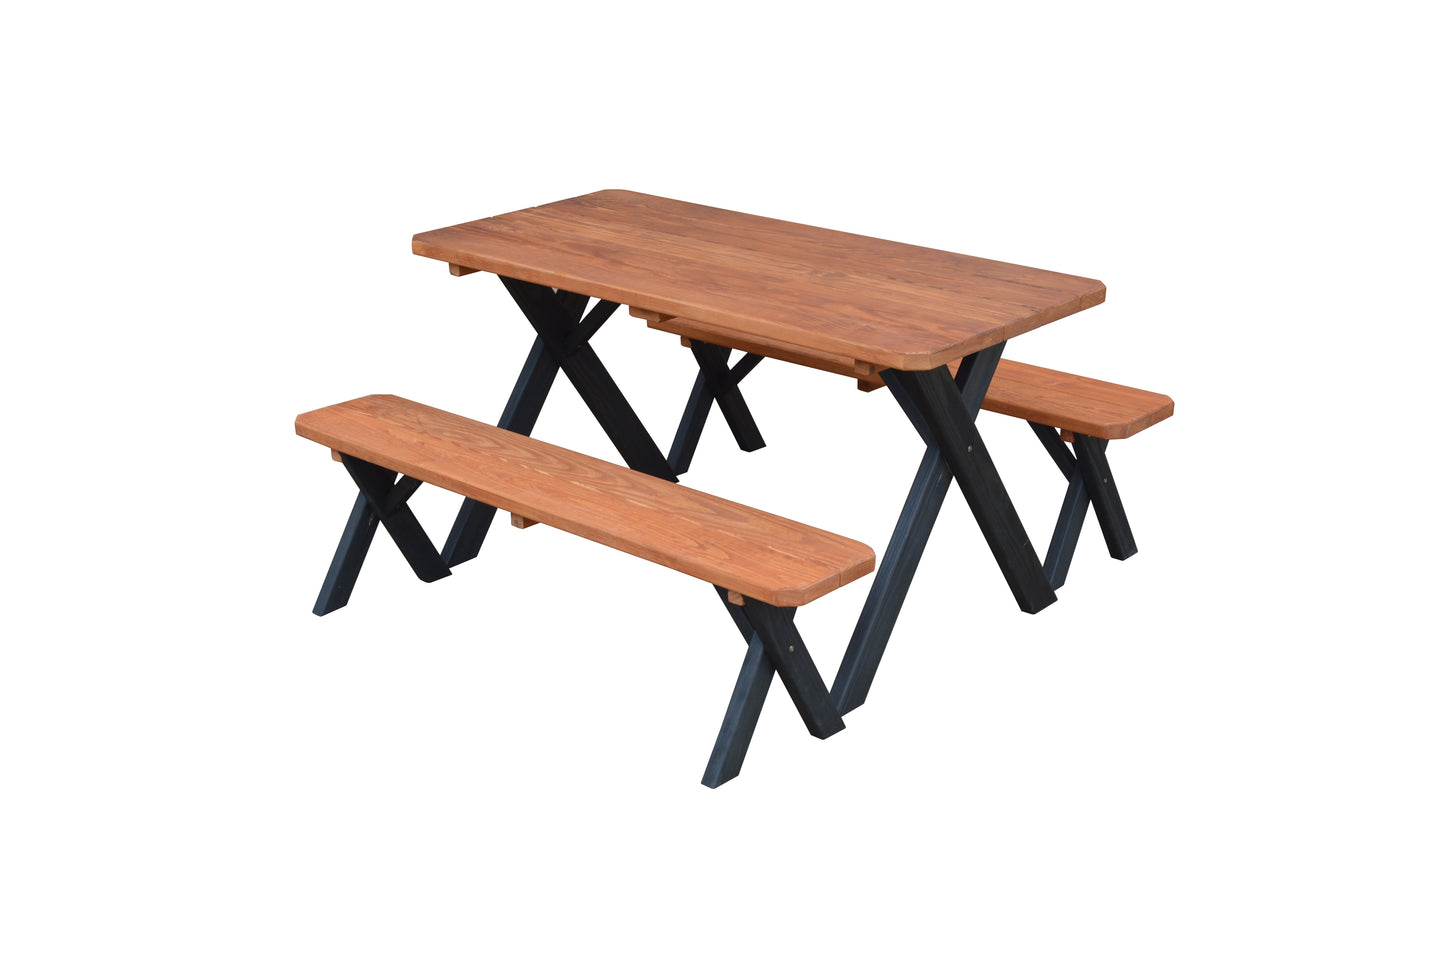 A&L Furniture Co. Pressure Treated Pine 5' Cross-leg Picnic Table w/2 Benches Redwood on Black - LEAD TIME TO SHIP 10 BUSINESS DAYS